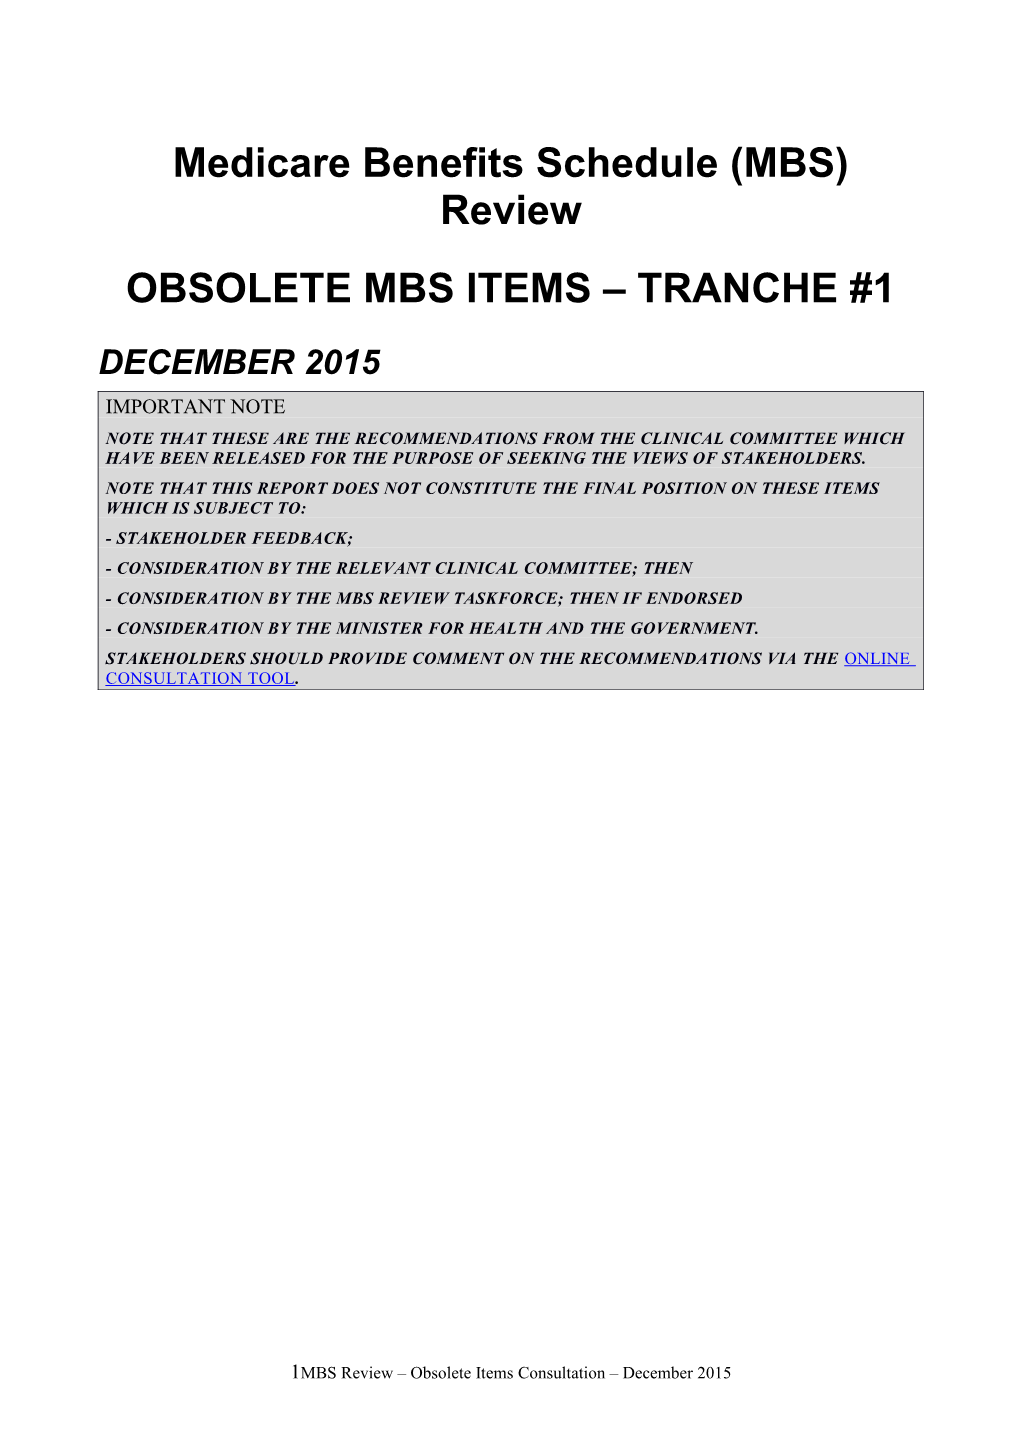 OBSOLETE MBS ITEMS TRANCHE #1, Medicare Benefits Schedule (MBS) Review